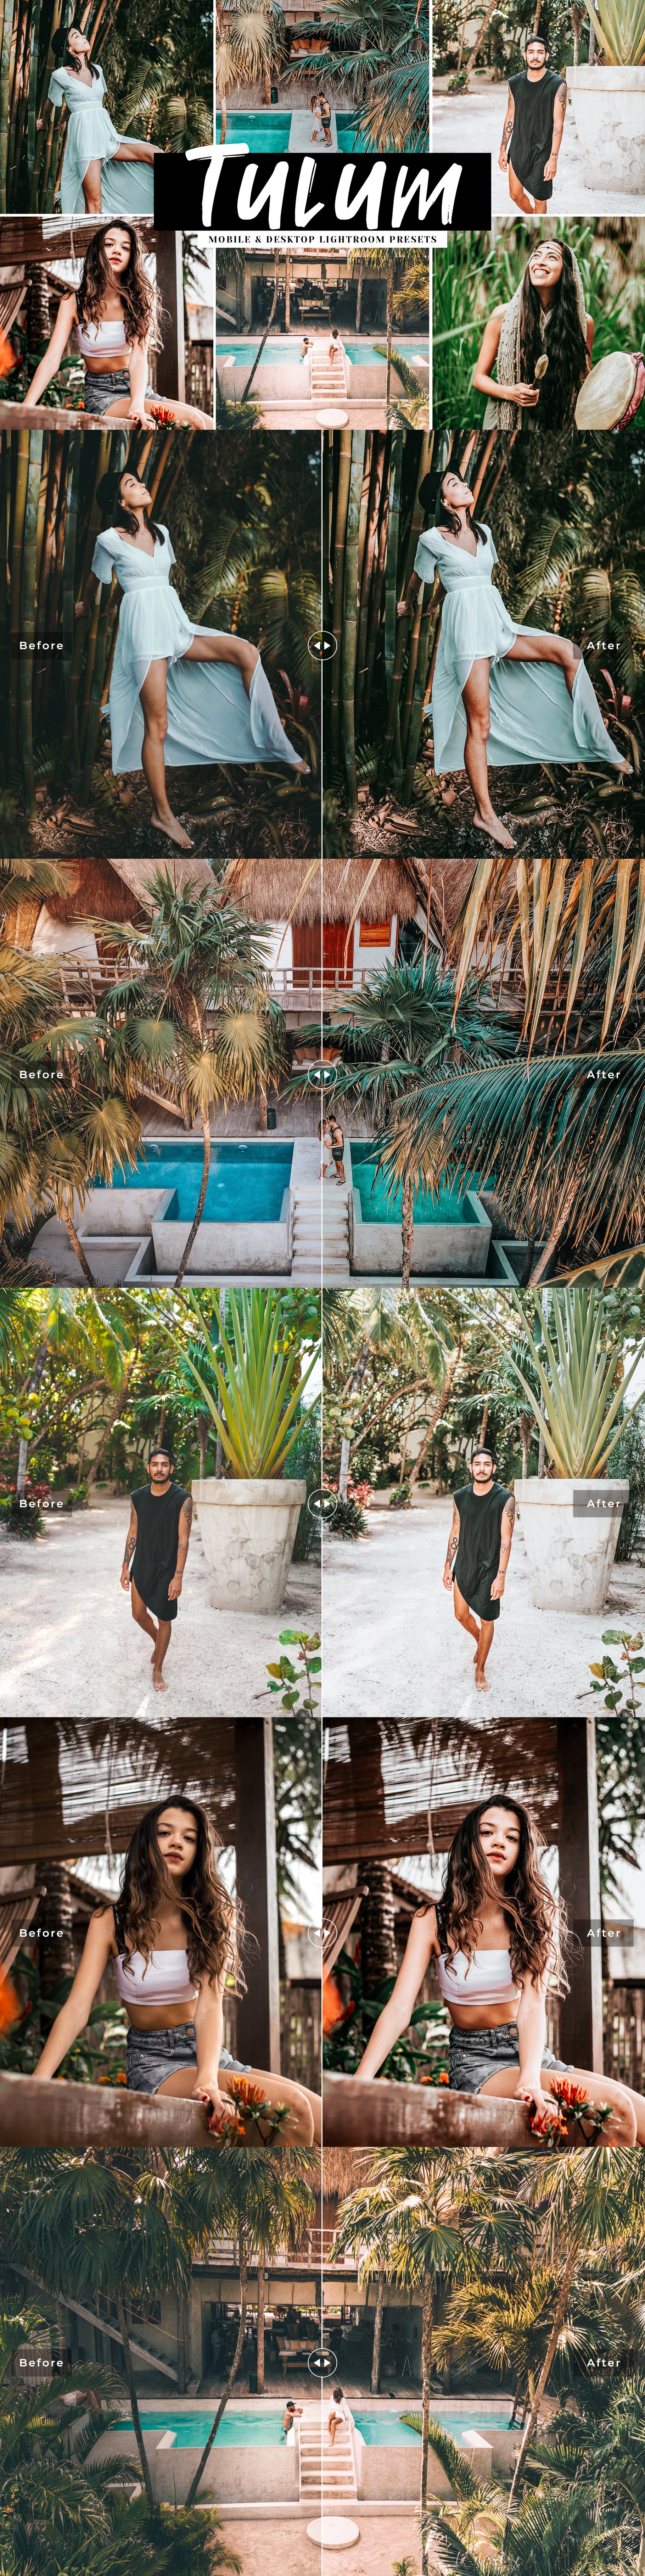 Tulum Lightroom Presets Collectioncover image.